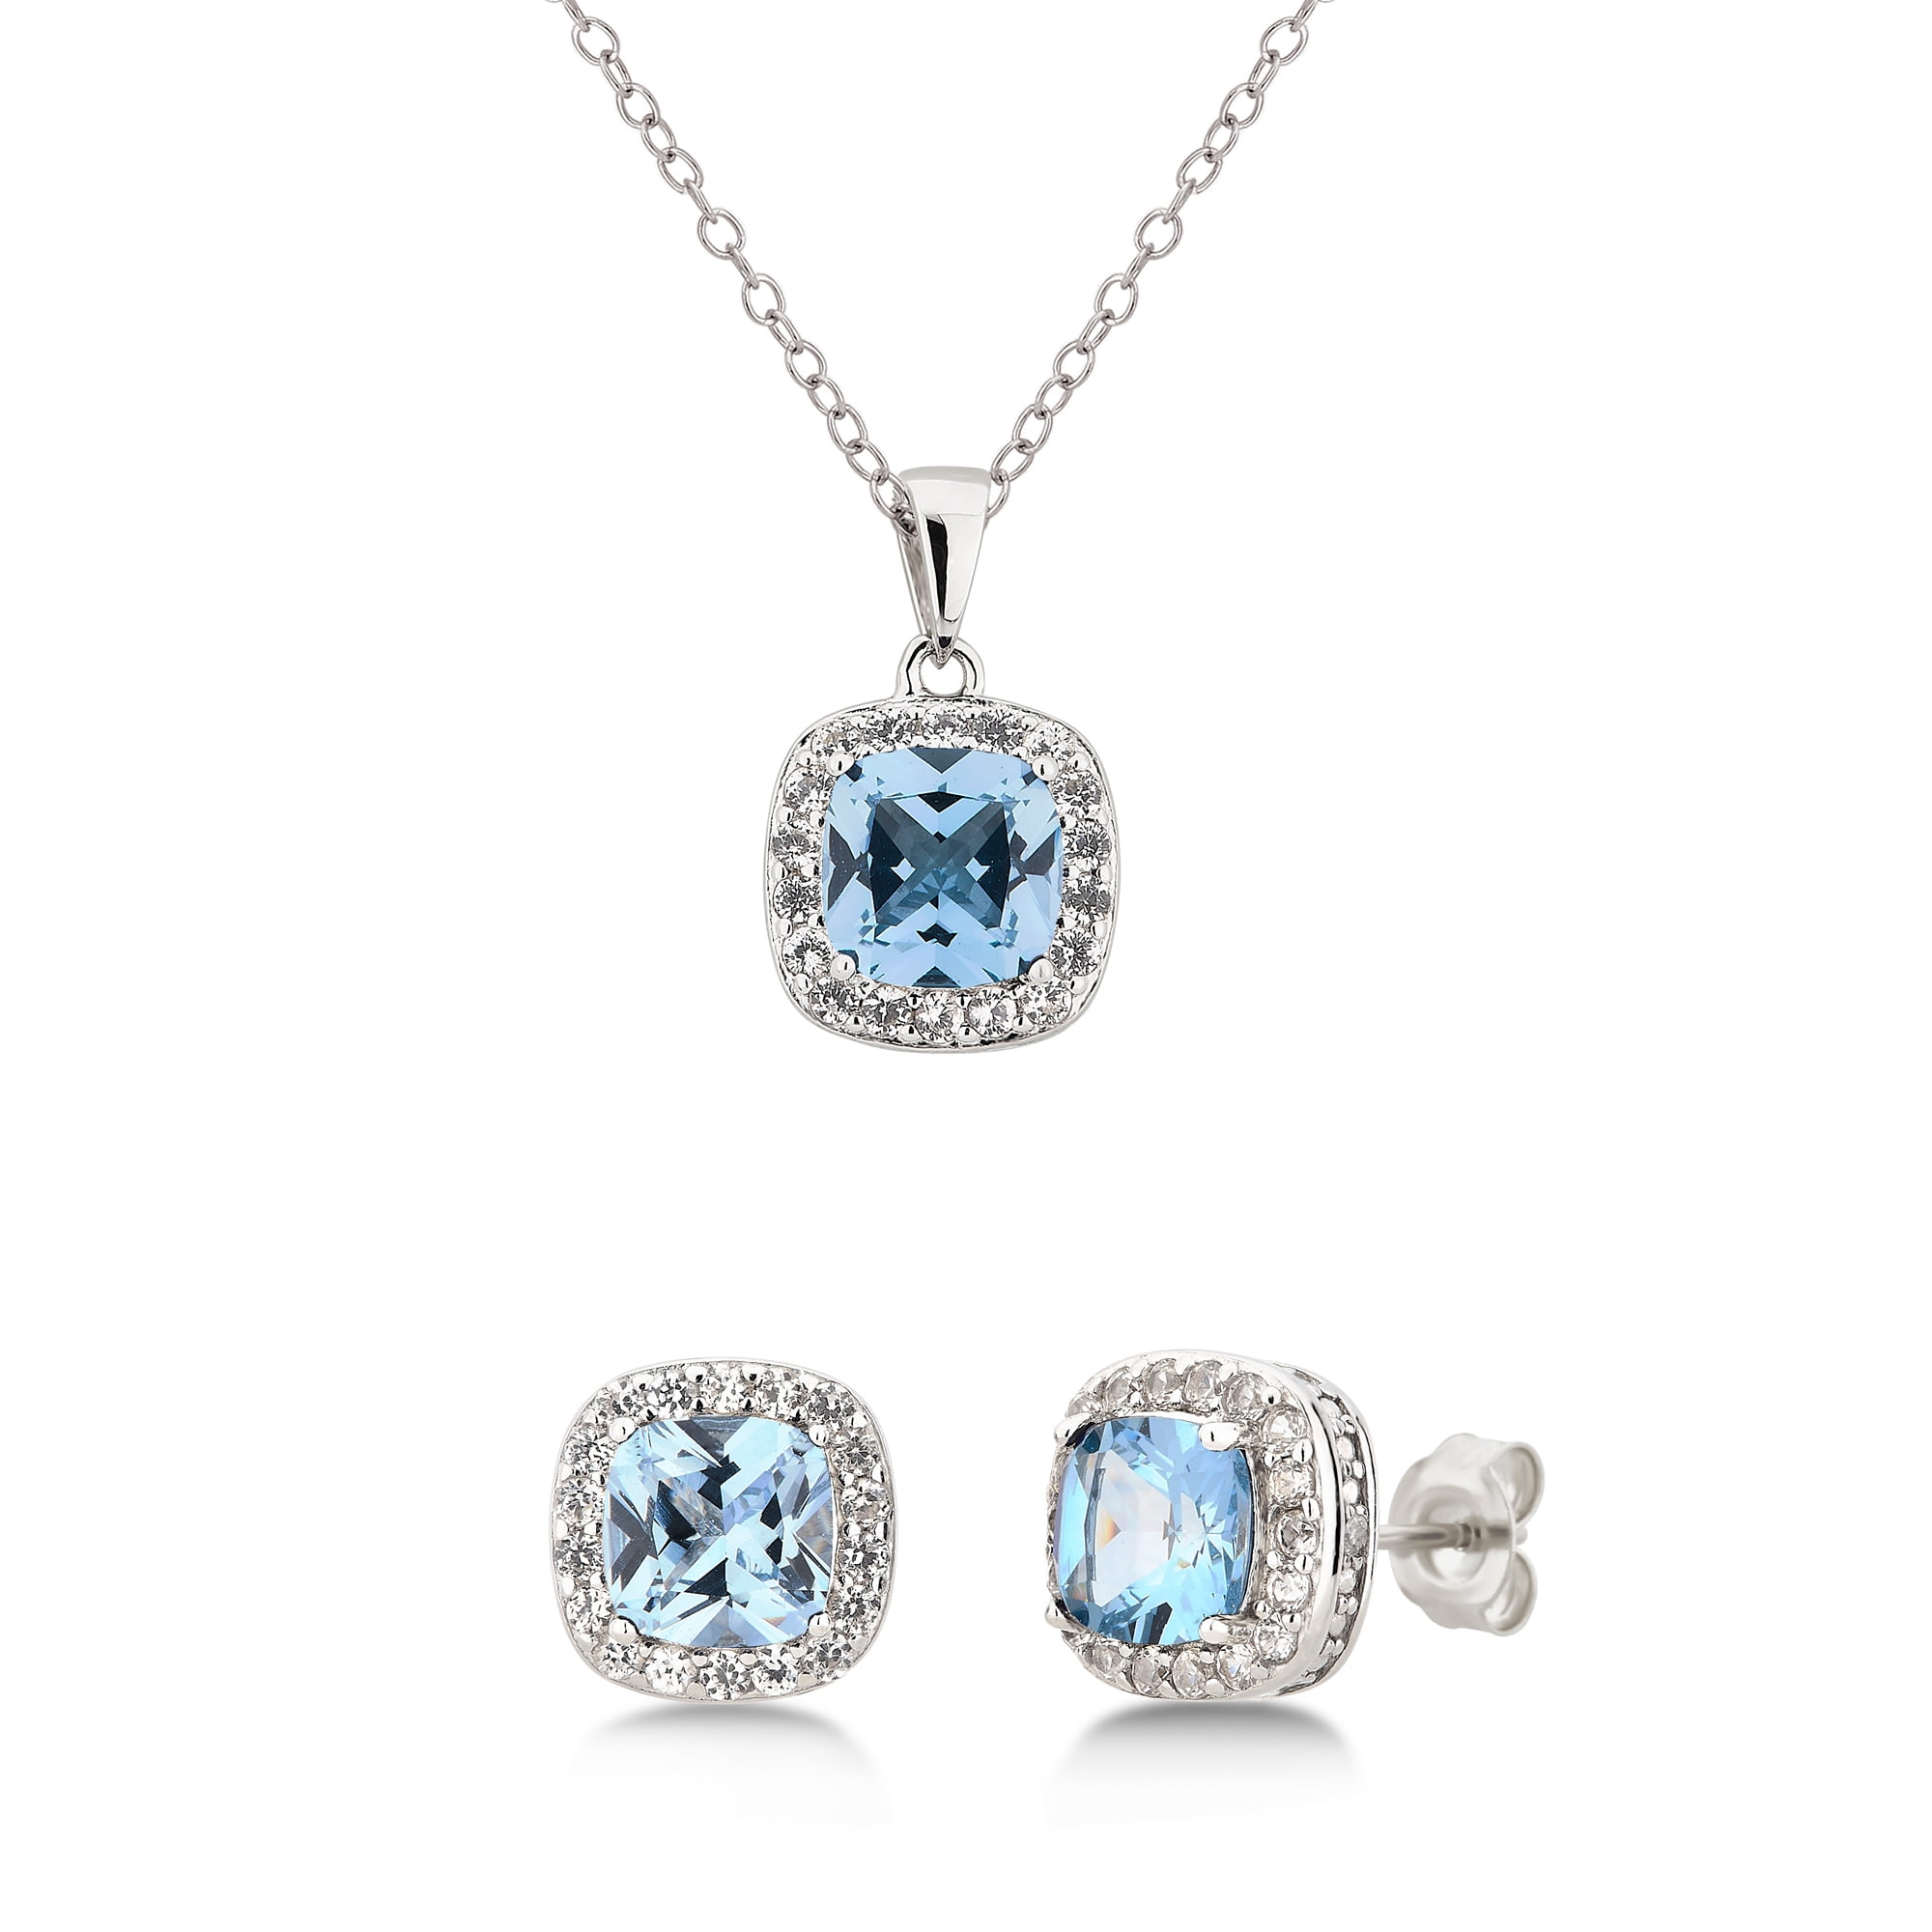 2 Ext. Sterling Silver Light Blue Color Square Multifaceted CZ Earring & Necklace Set 16